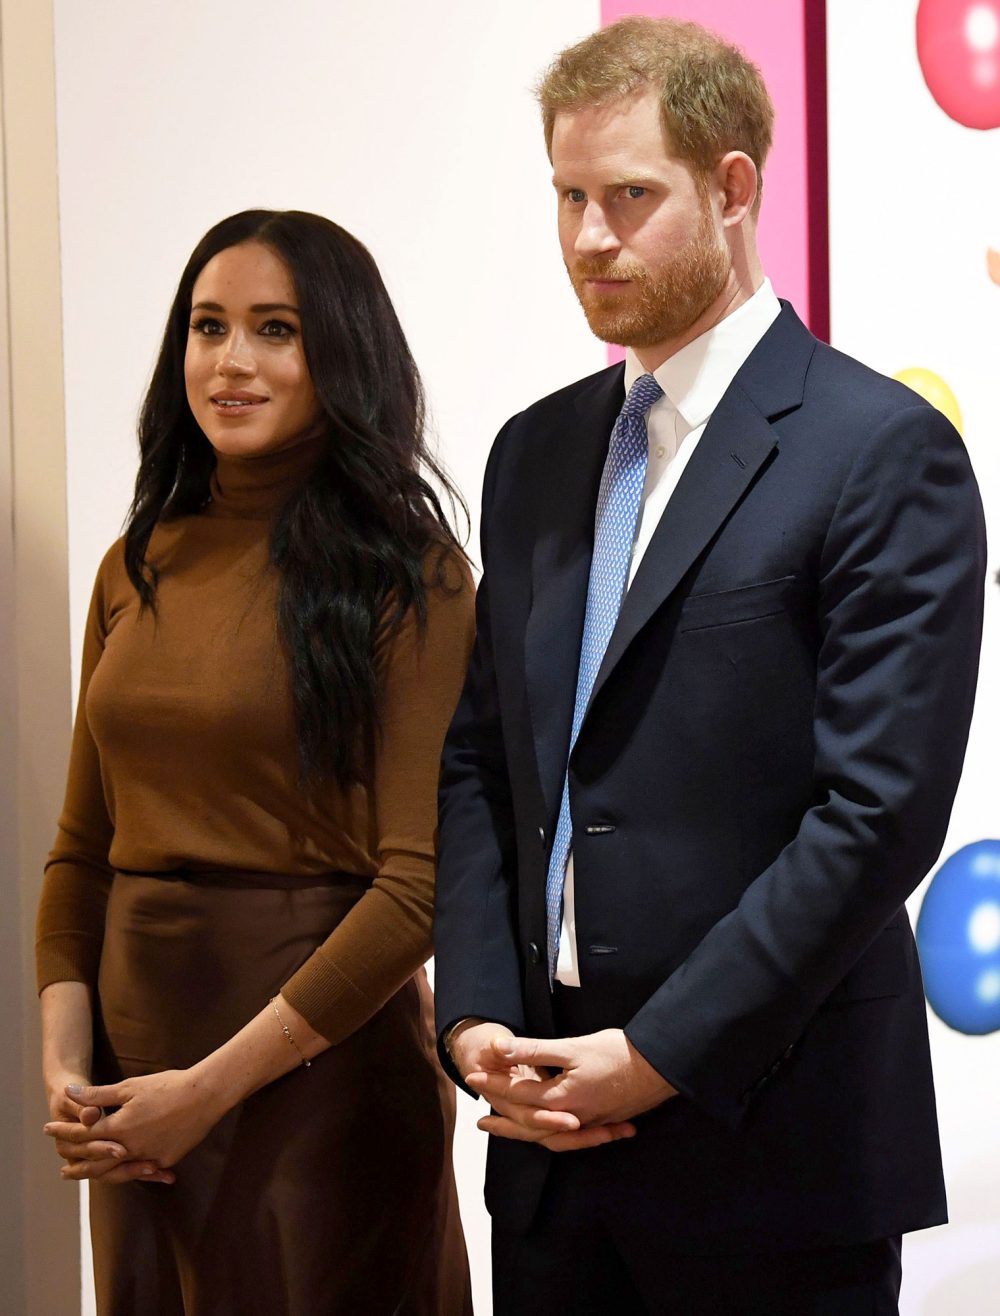 Thomas Markle Disappointed in Prince Harry and Duchess Meghan